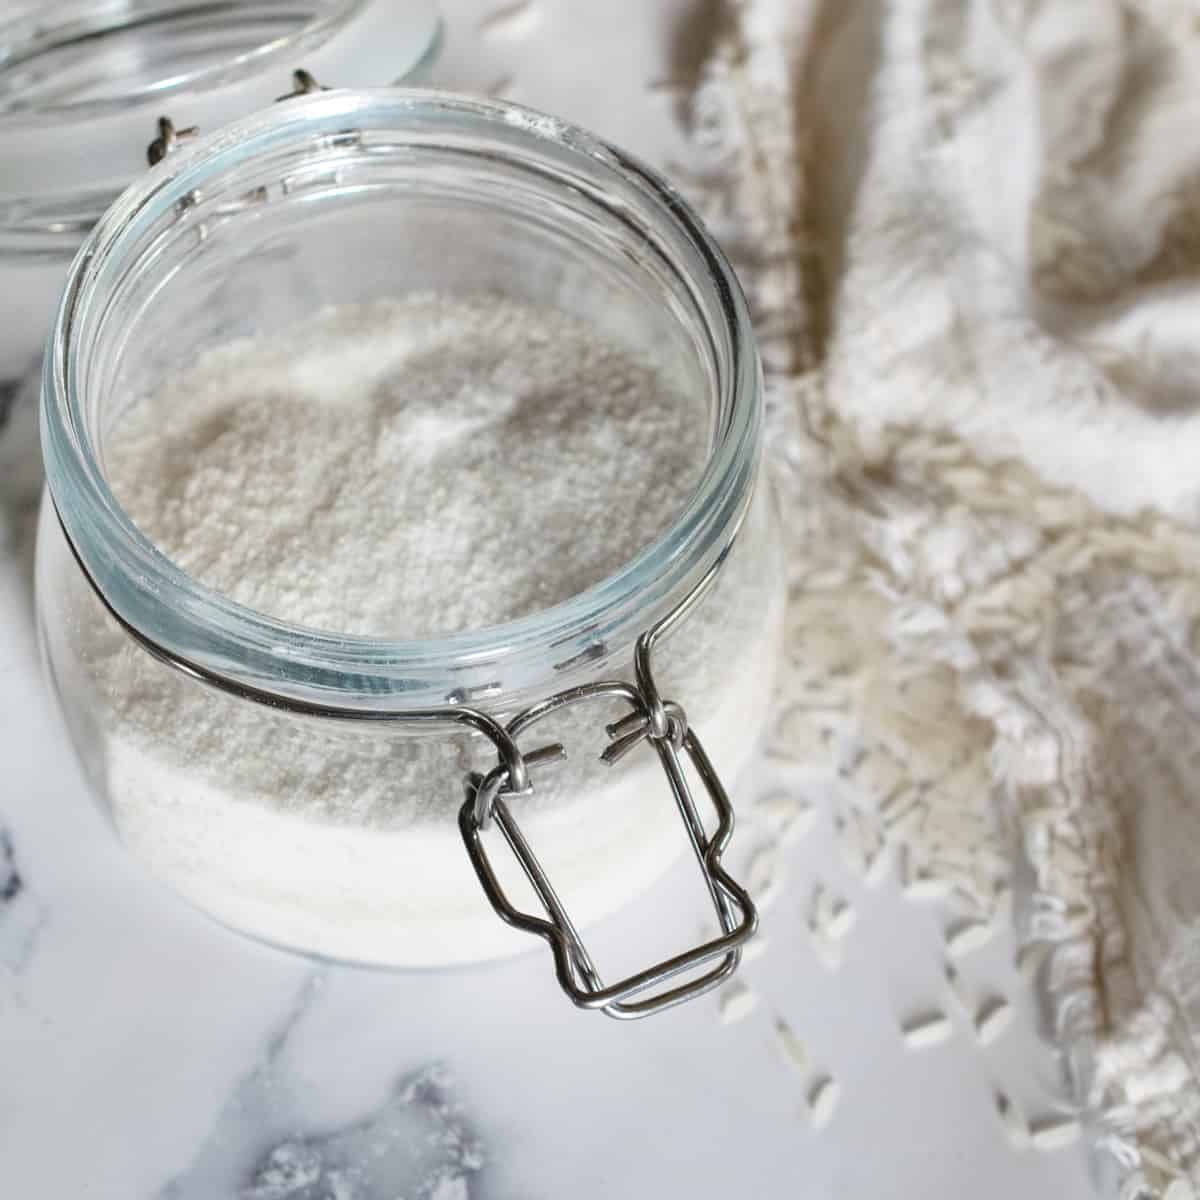 glass hinged jar with rice flour next to grains of rice sprinkled over a white fringe towel